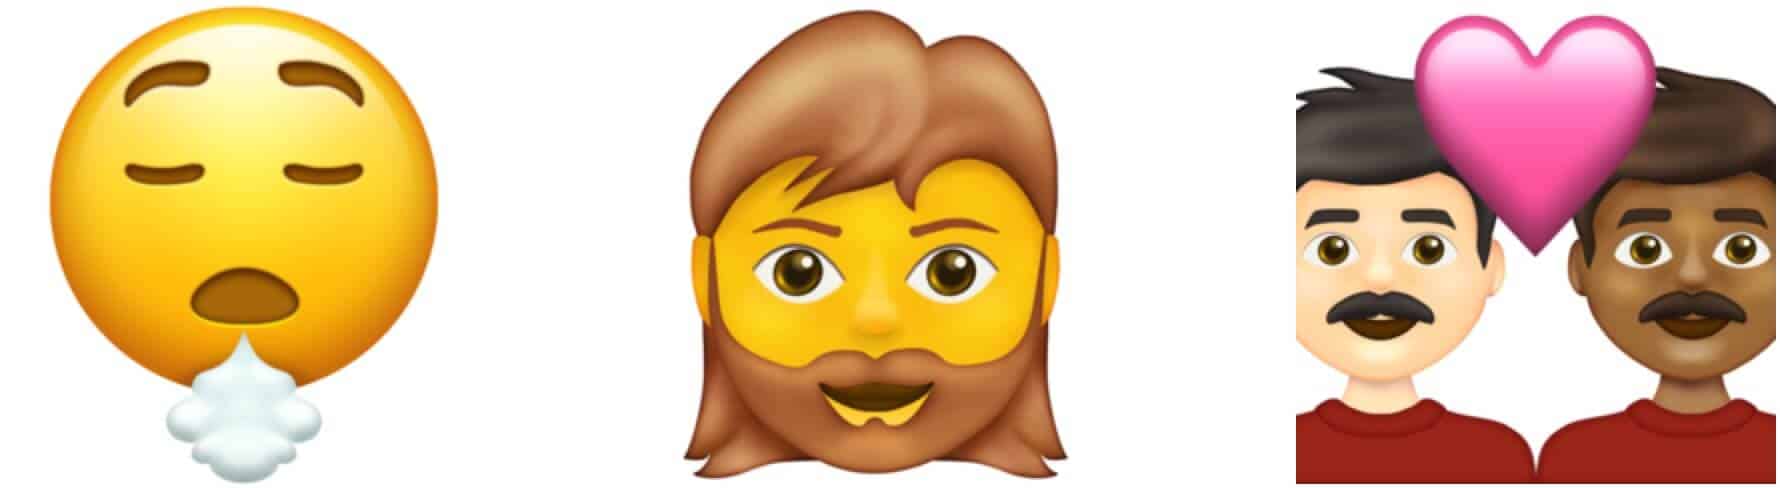 Some New Emojis Set to Debut in 2021  Not Many Until 2022 - 84